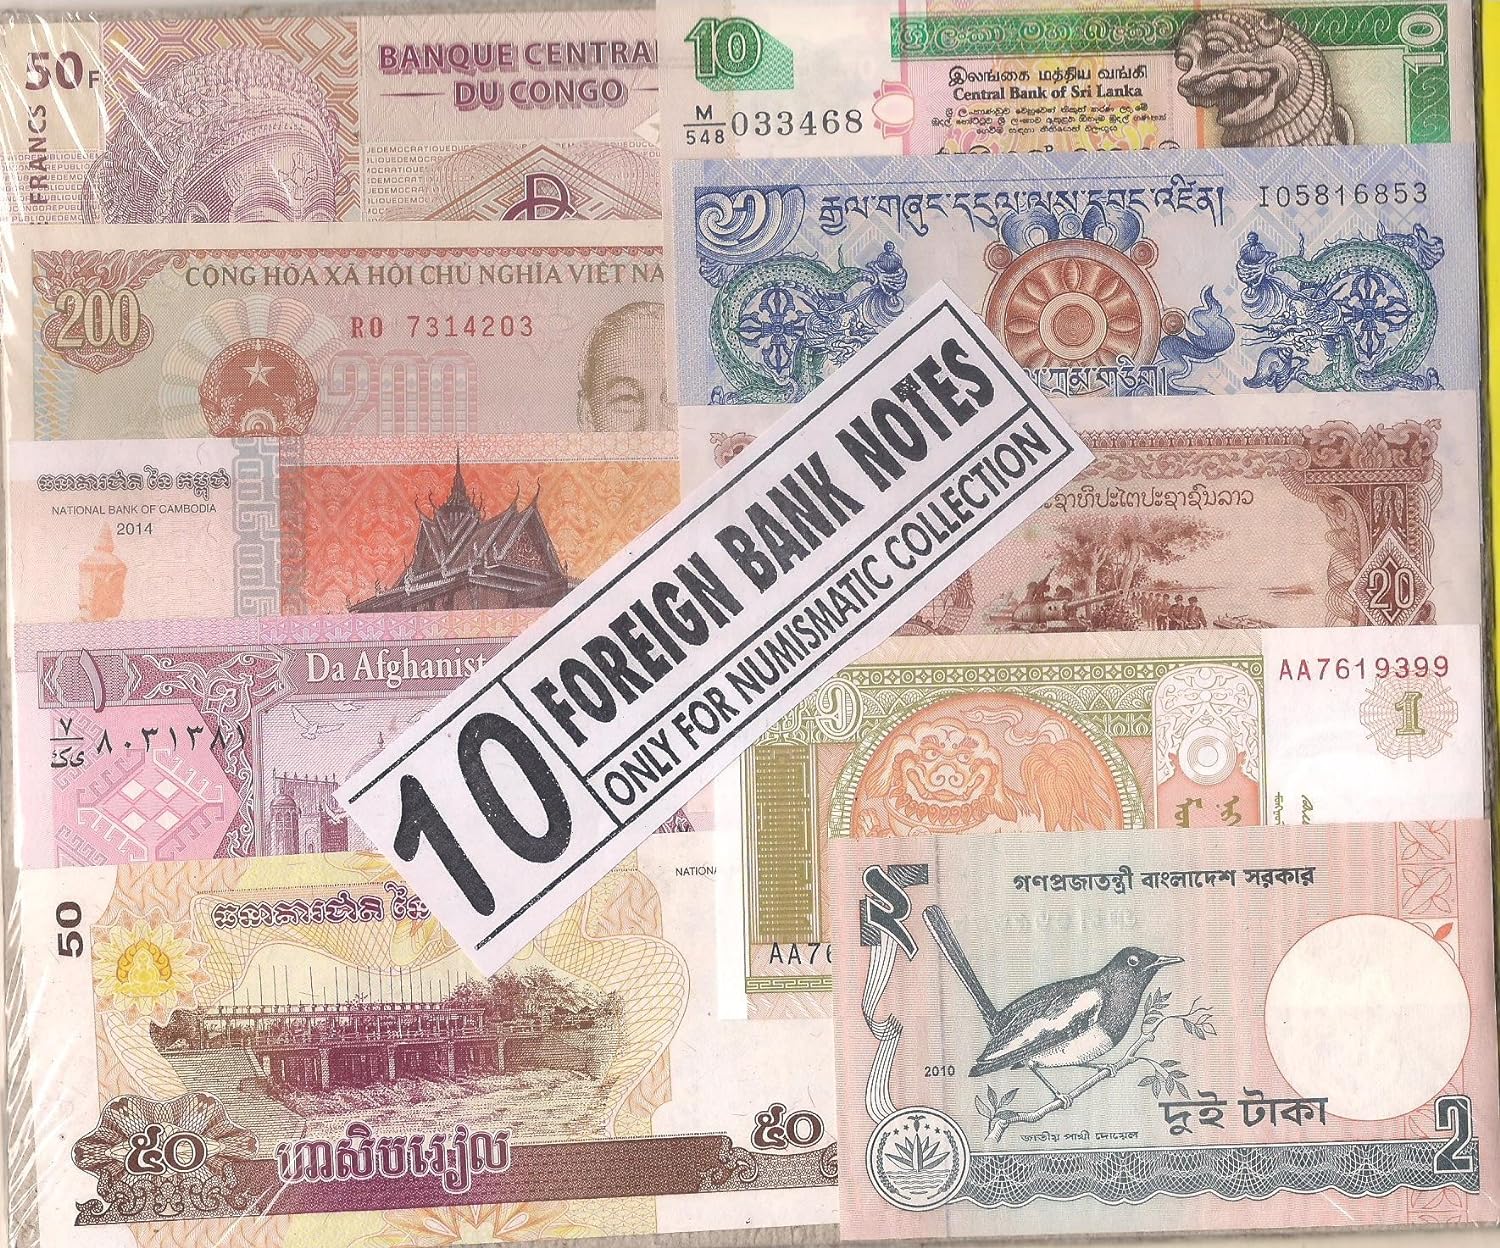 Foreign currency notes and coins.